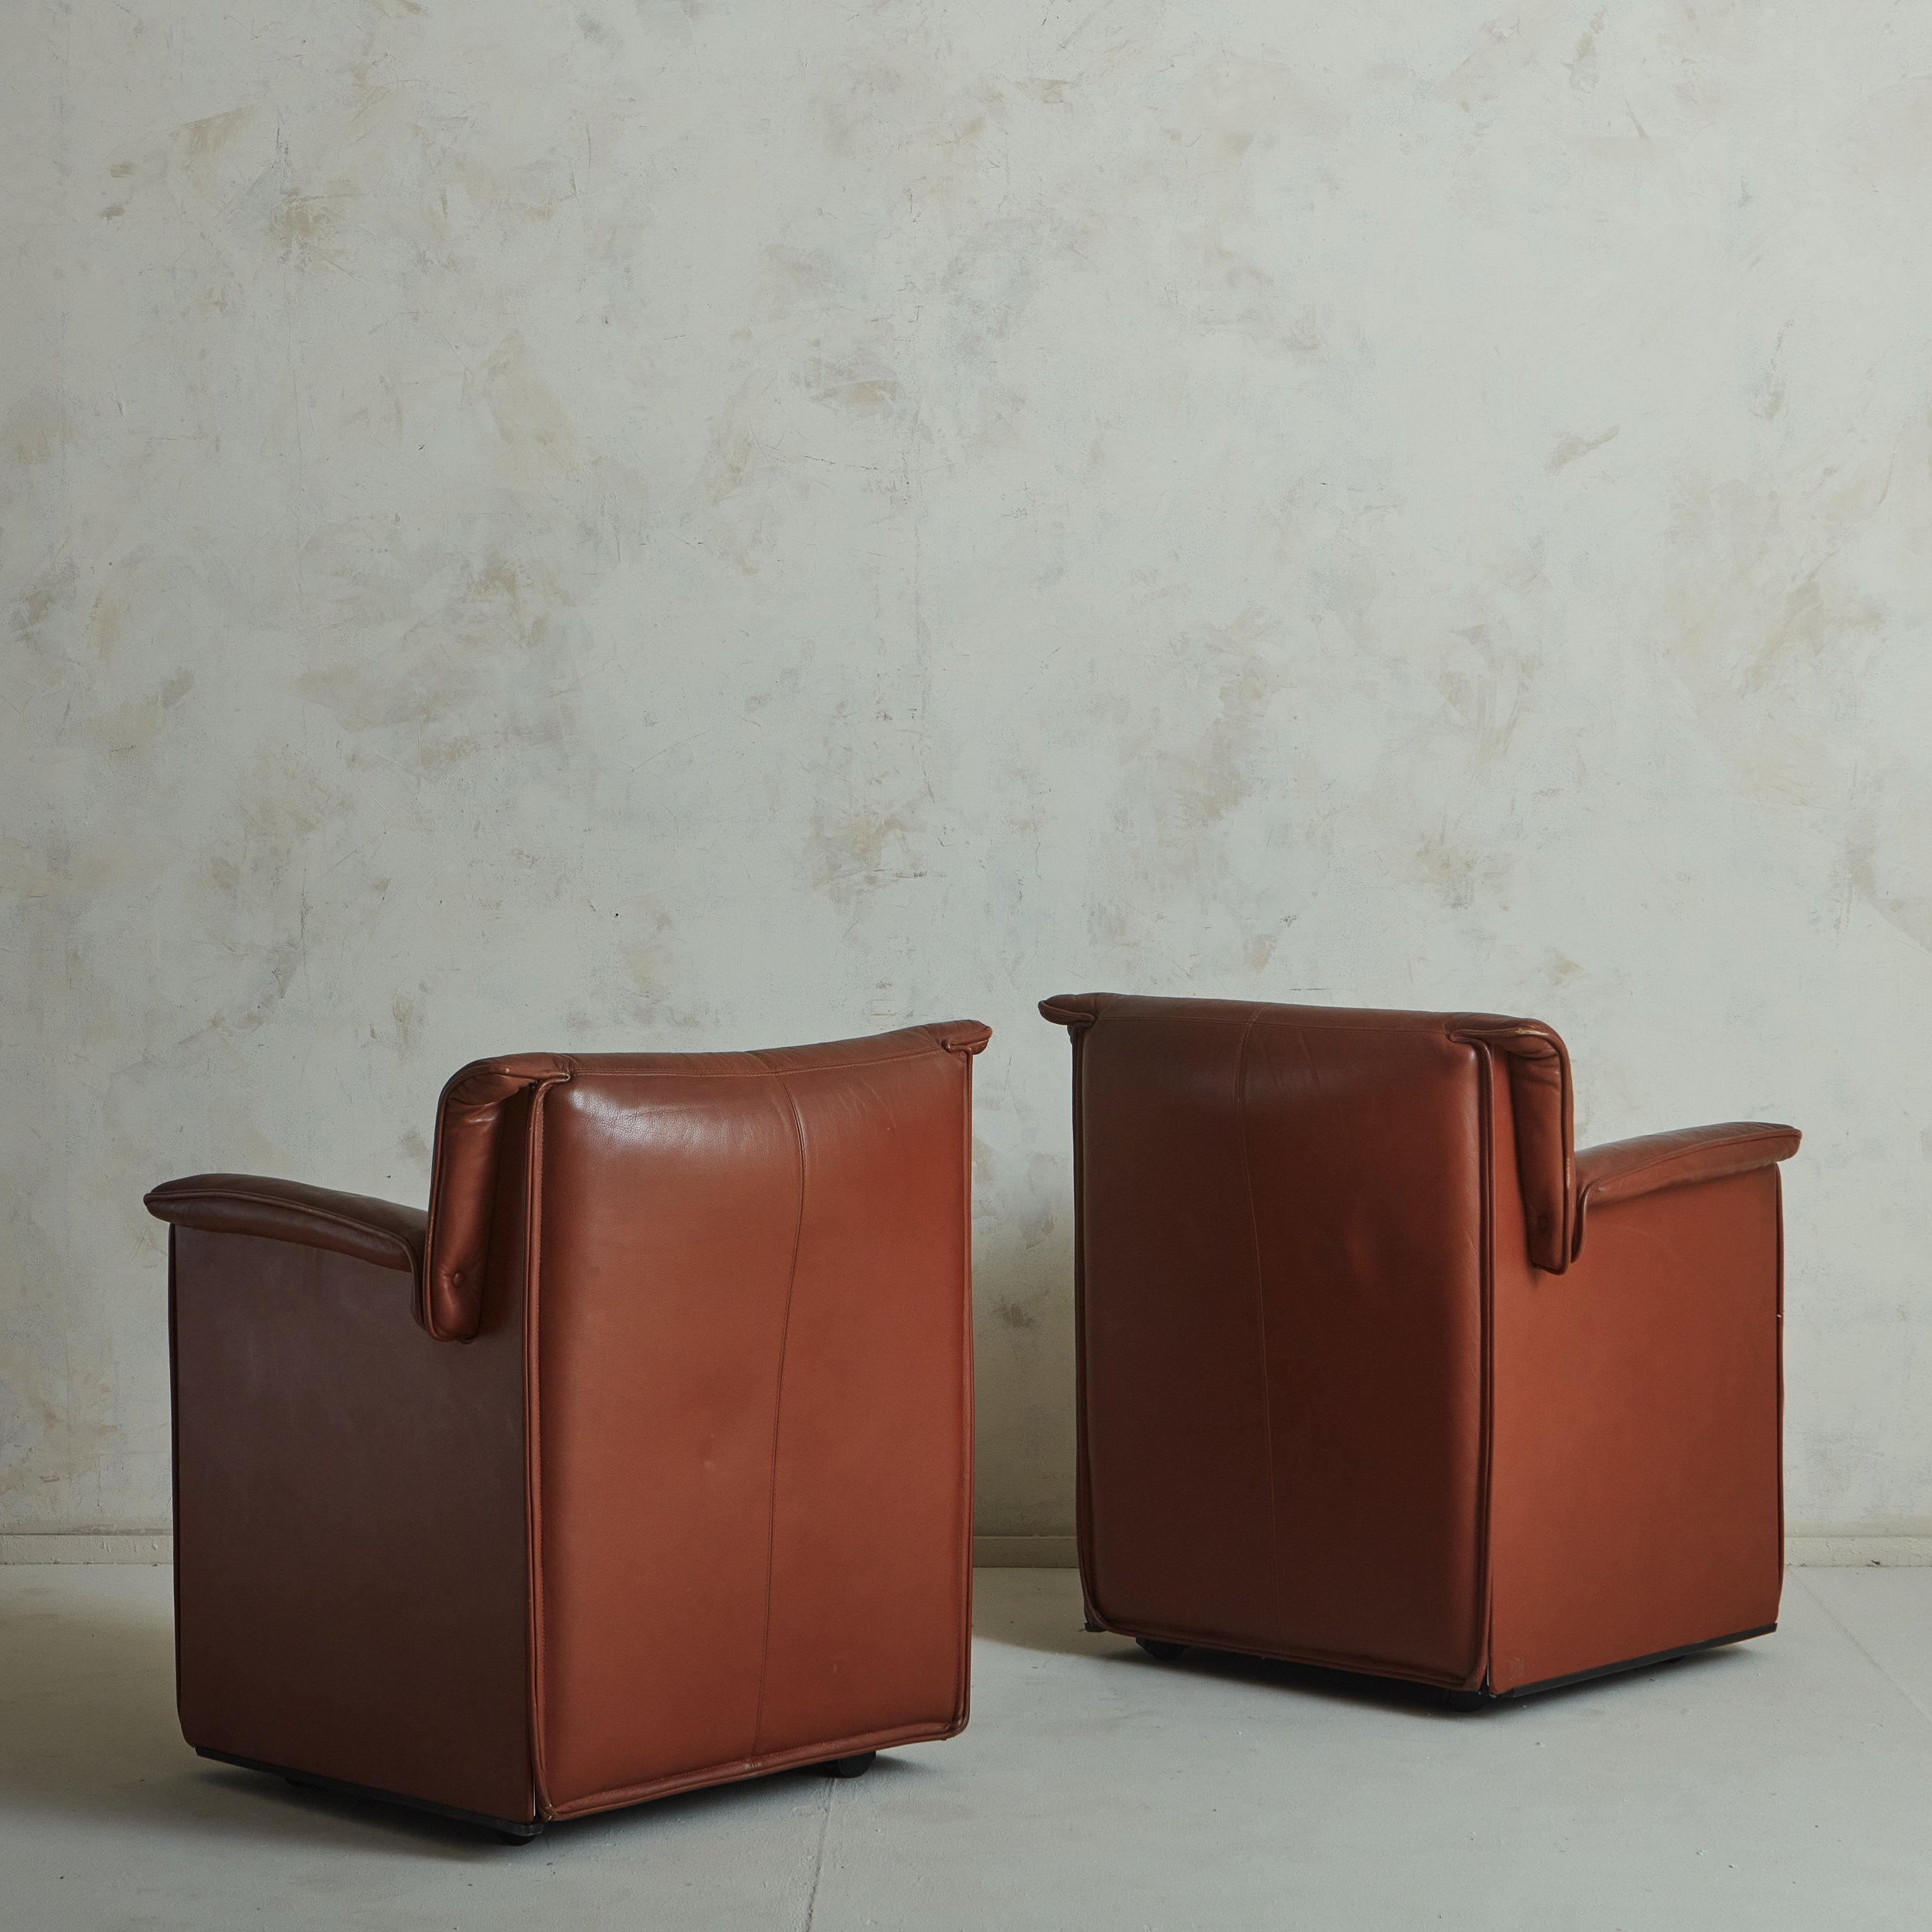 ‘Lauriana’ Chairs in Cognac Leather by Afra + Tobia Scarpa for B&B Italia,  1978 - 7 Available — South Loop Loft